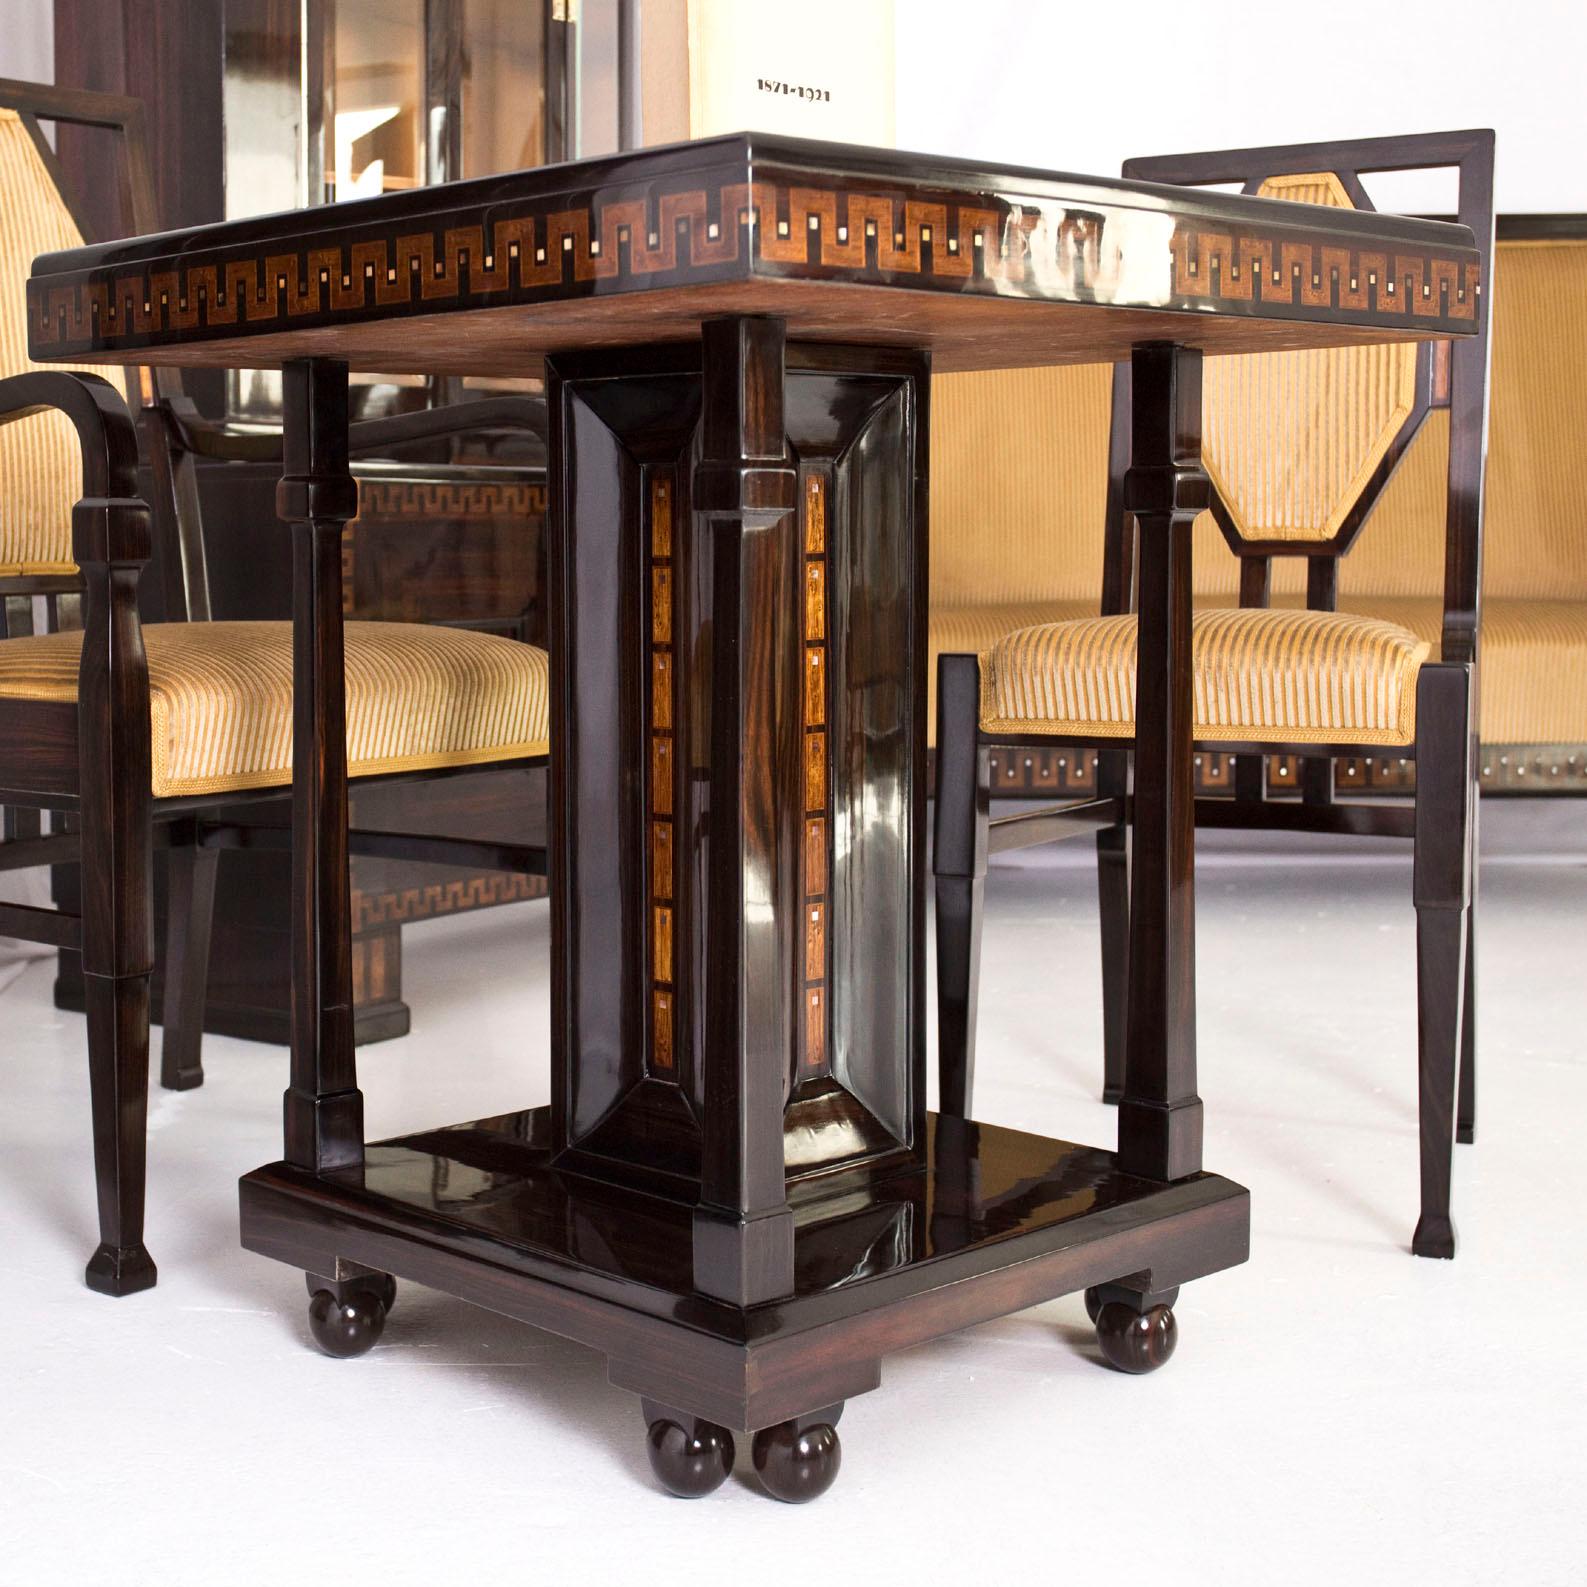 Exceptional and rare living room set composed by a table with four chairs, and sofà, a Book cabinet and Pedestal by Ludwig Alter, Darmstadt, Germany, 1908 circa.
Part of a living room ordered and executed in 1908 by Ludwig Alter for a noble family